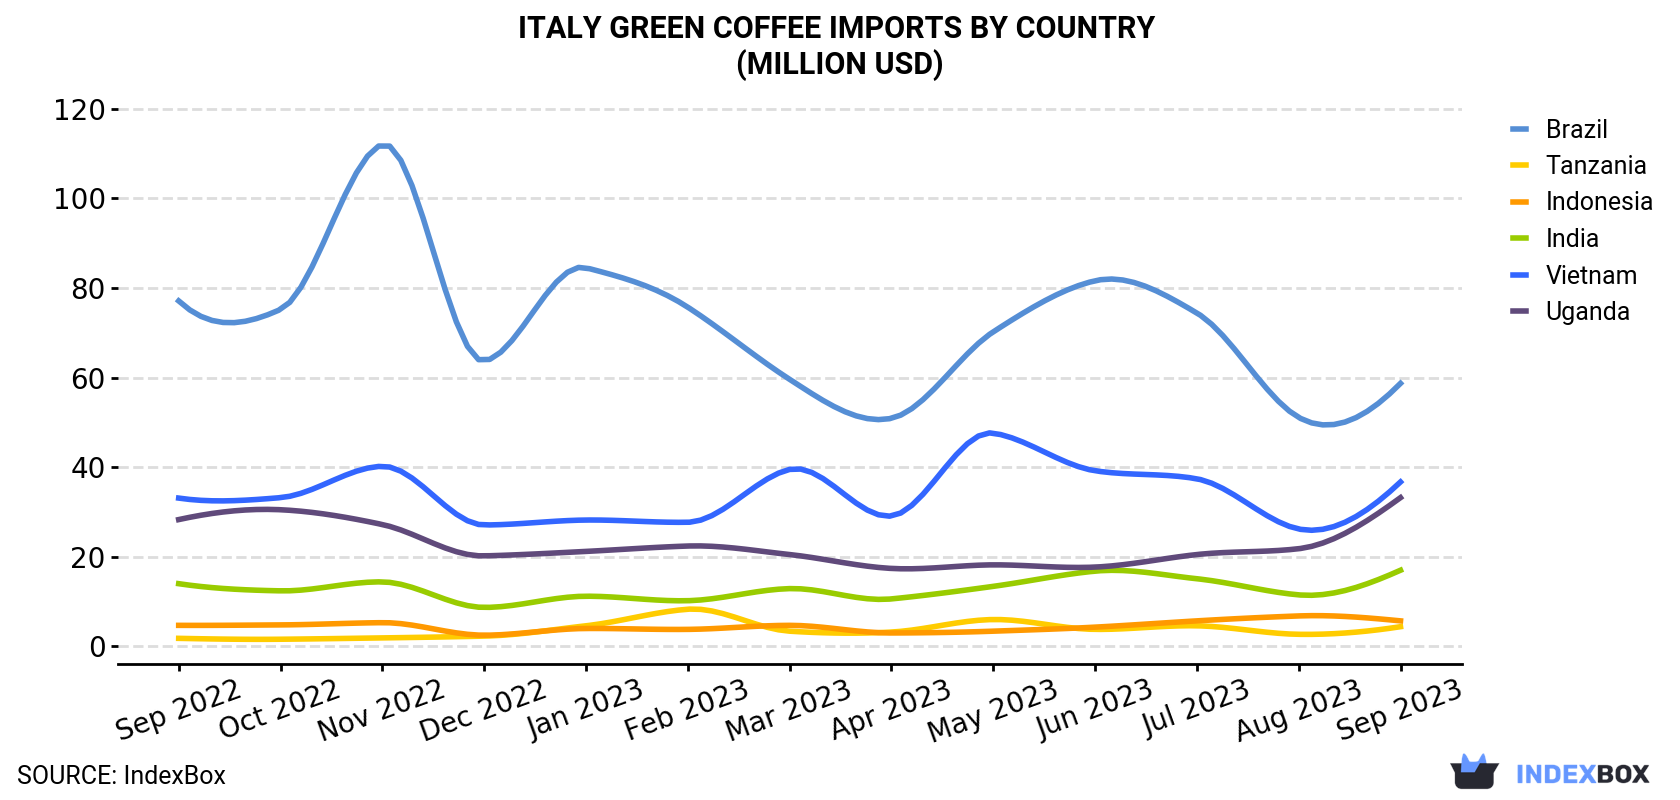 Italy Green Coffee Imports By Country (Million USD)